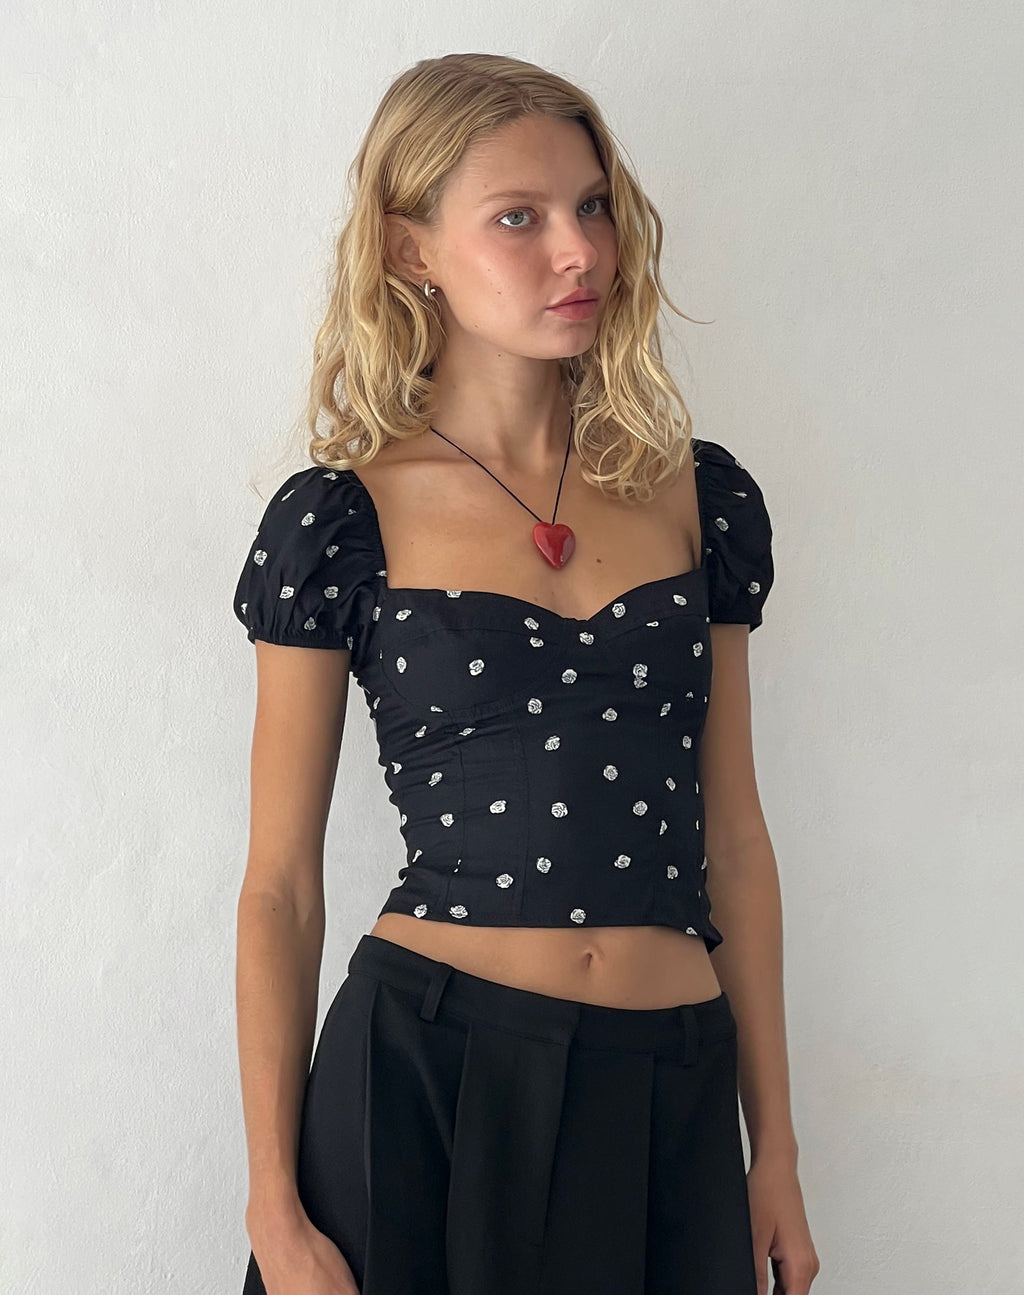 Leify Sweetheart Top in Ditsy Rose Black